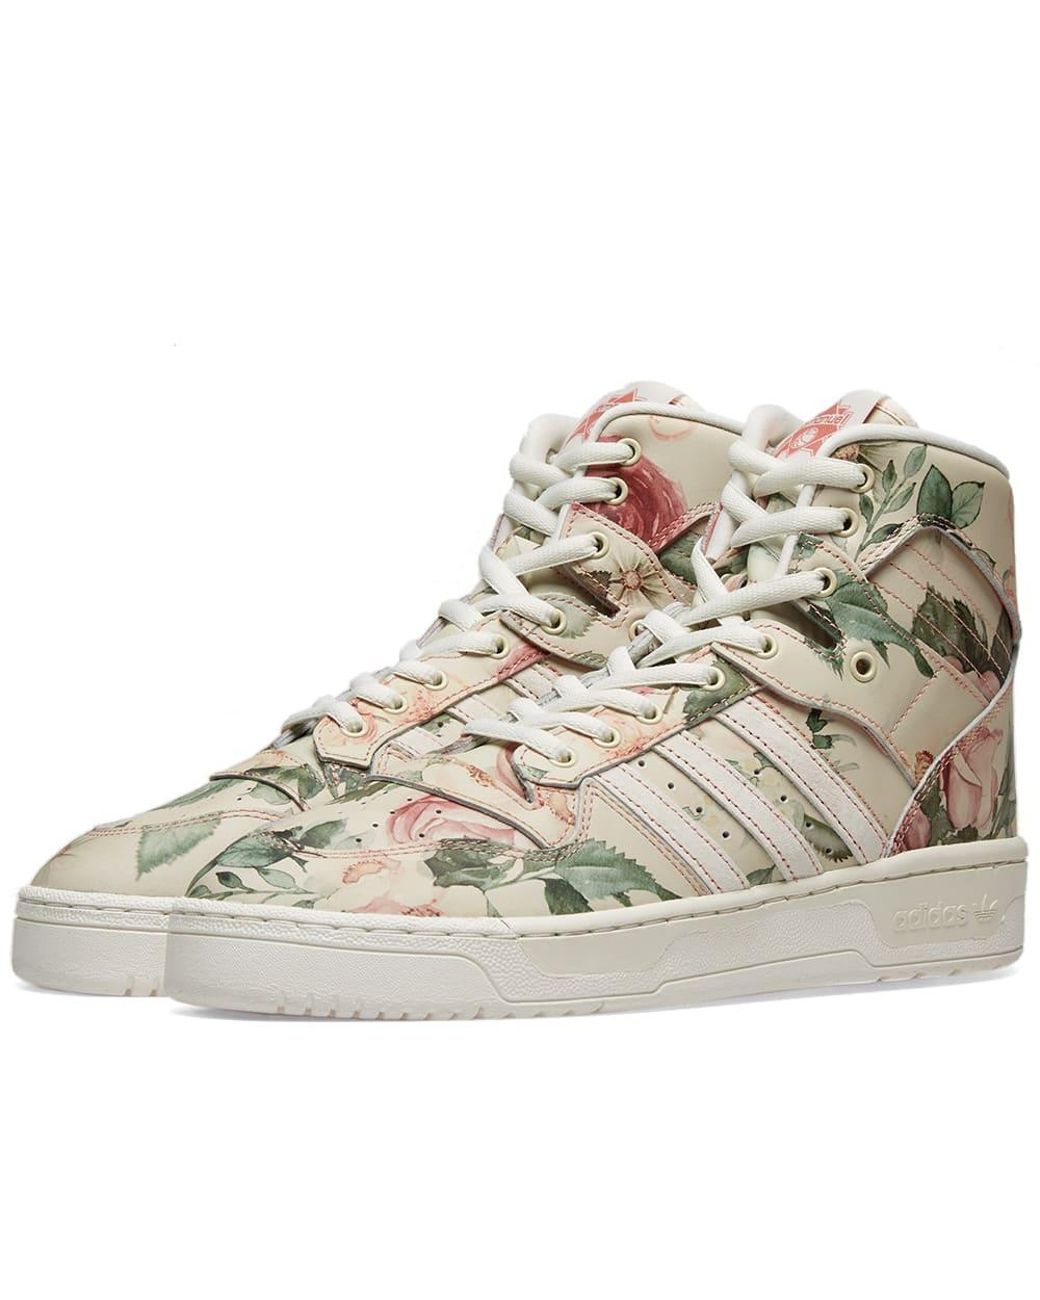 adidas Leather X Eric Emanuel Rivalry Hi Og in Floral (Pink) for Men - Lyst